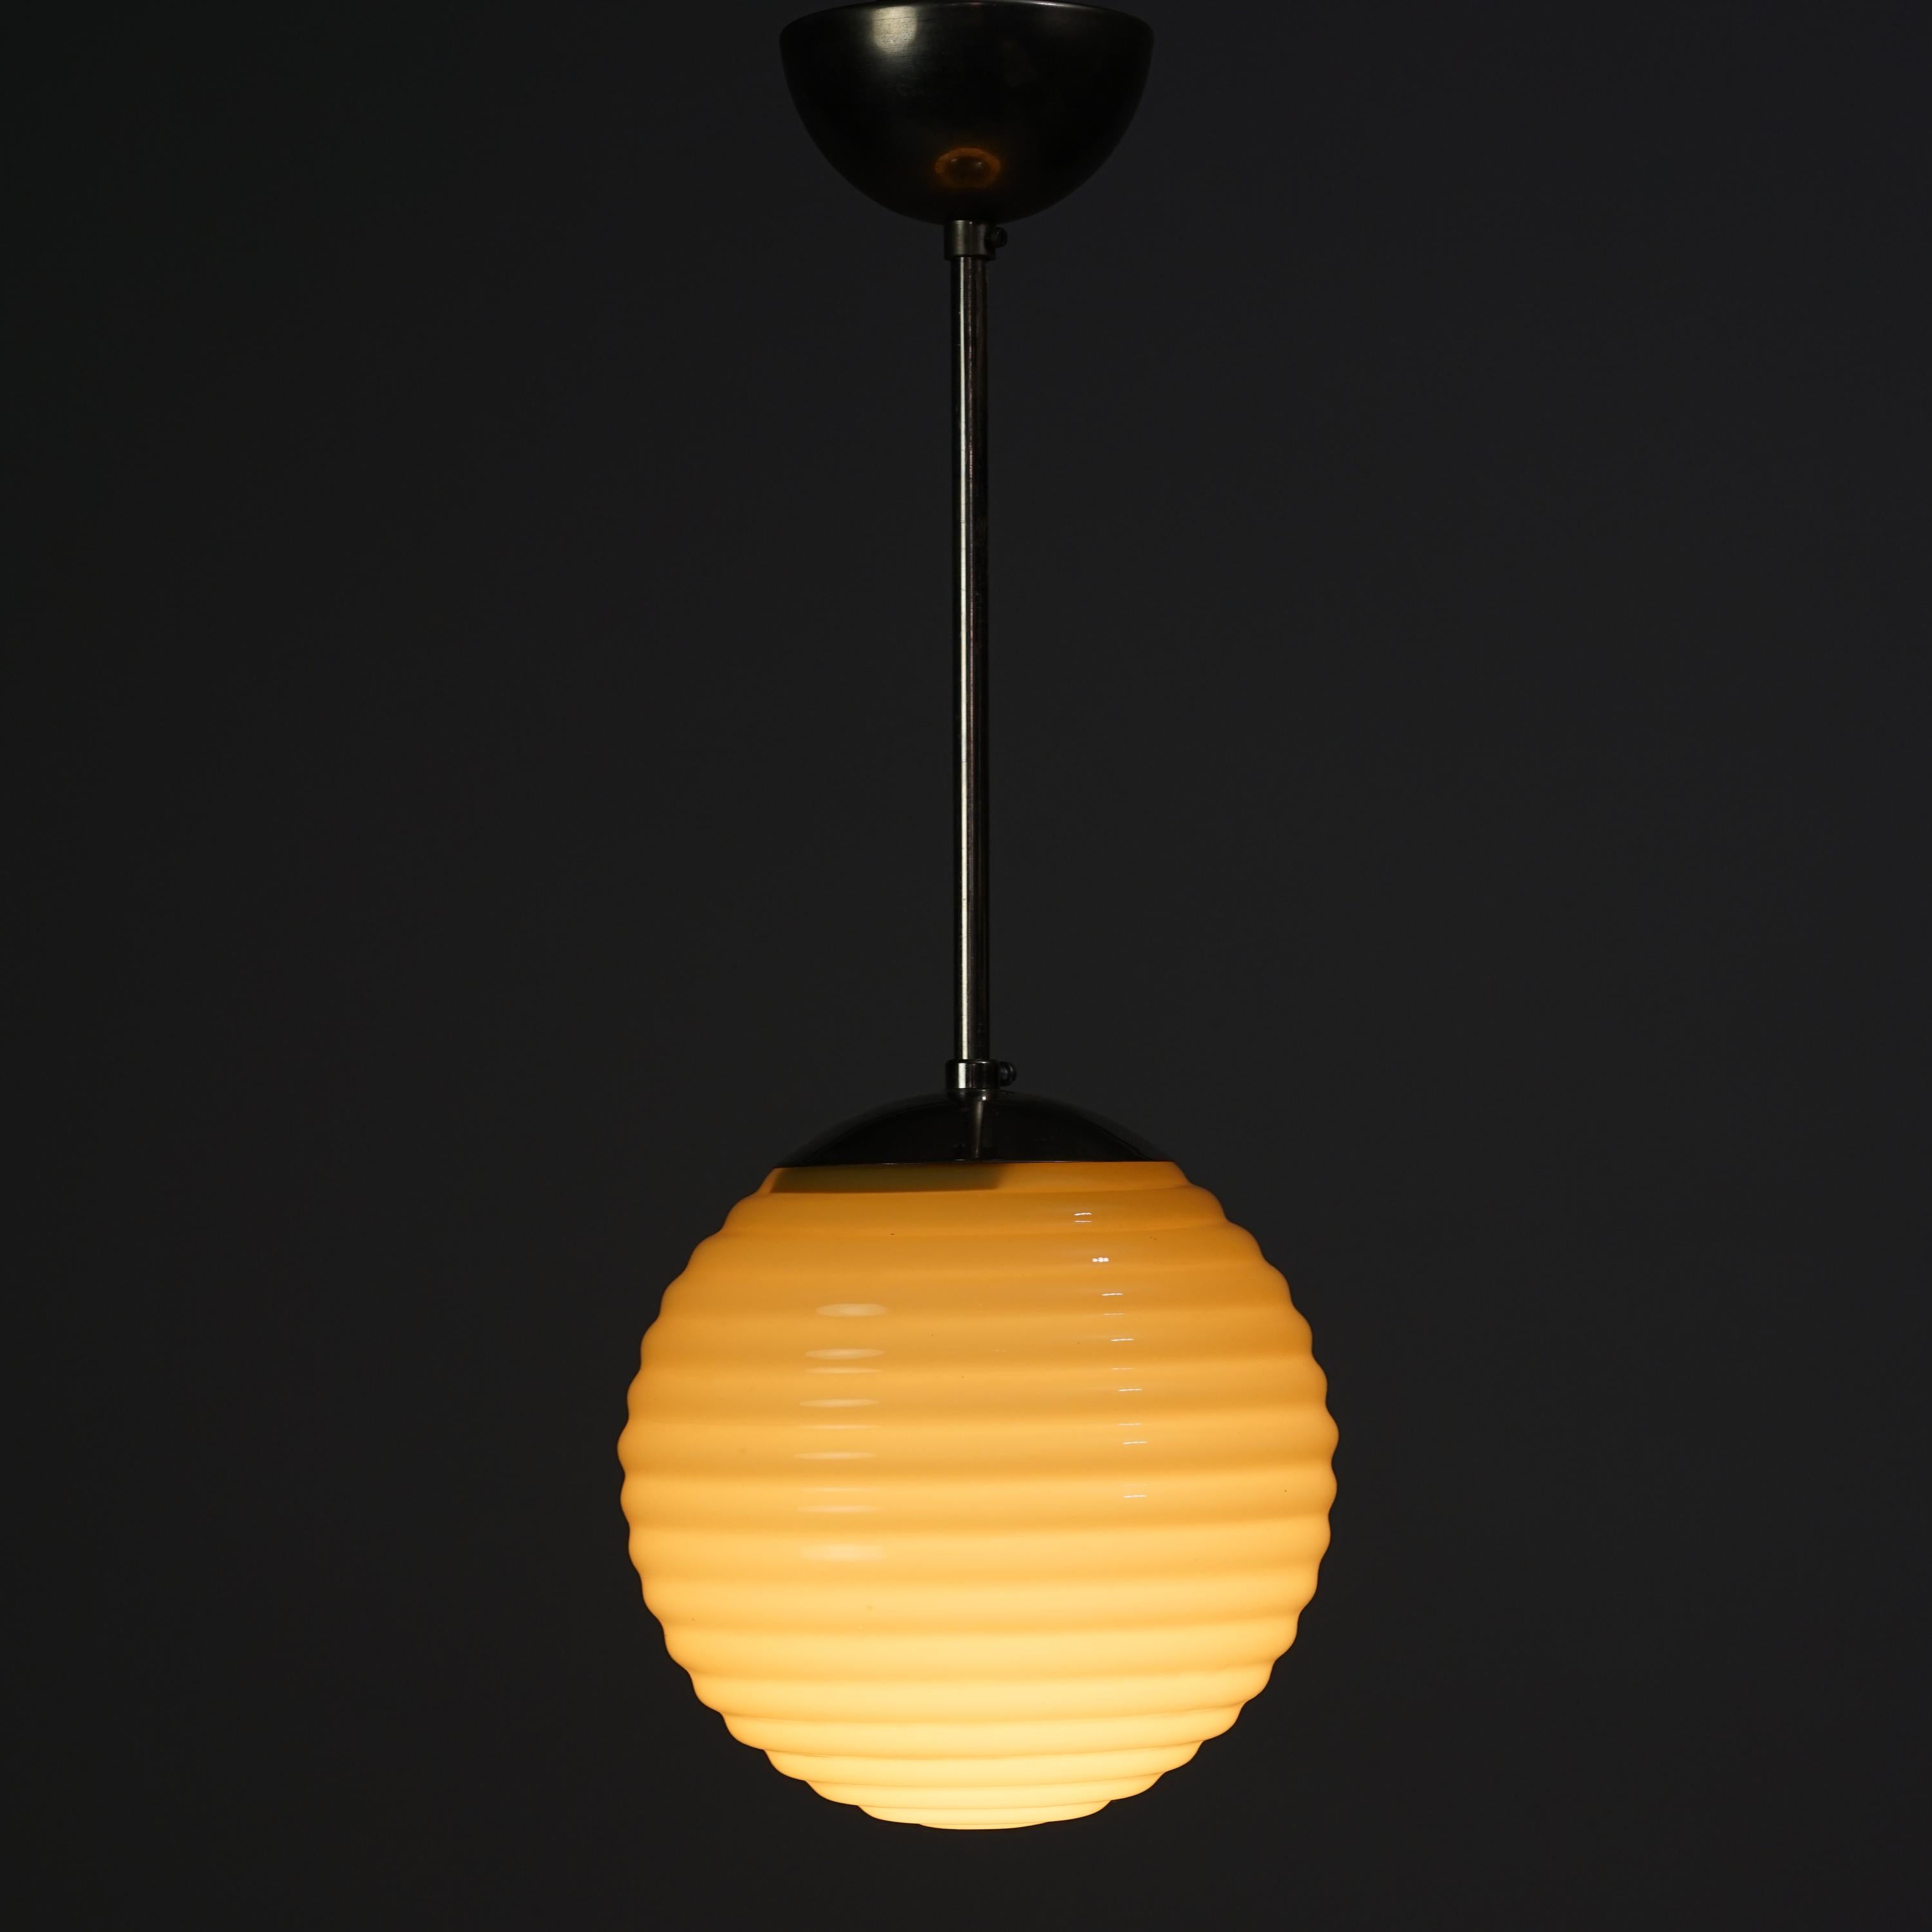 Paavo Tynell glass pendant manufactured by Taito Oy from the 1930s. Opaline glass lampshade, nickel-plated brass frame. Good vintage condition, minor wear consistent with age and use. Classic Scandinavian Modern design from Paavo Tynell.